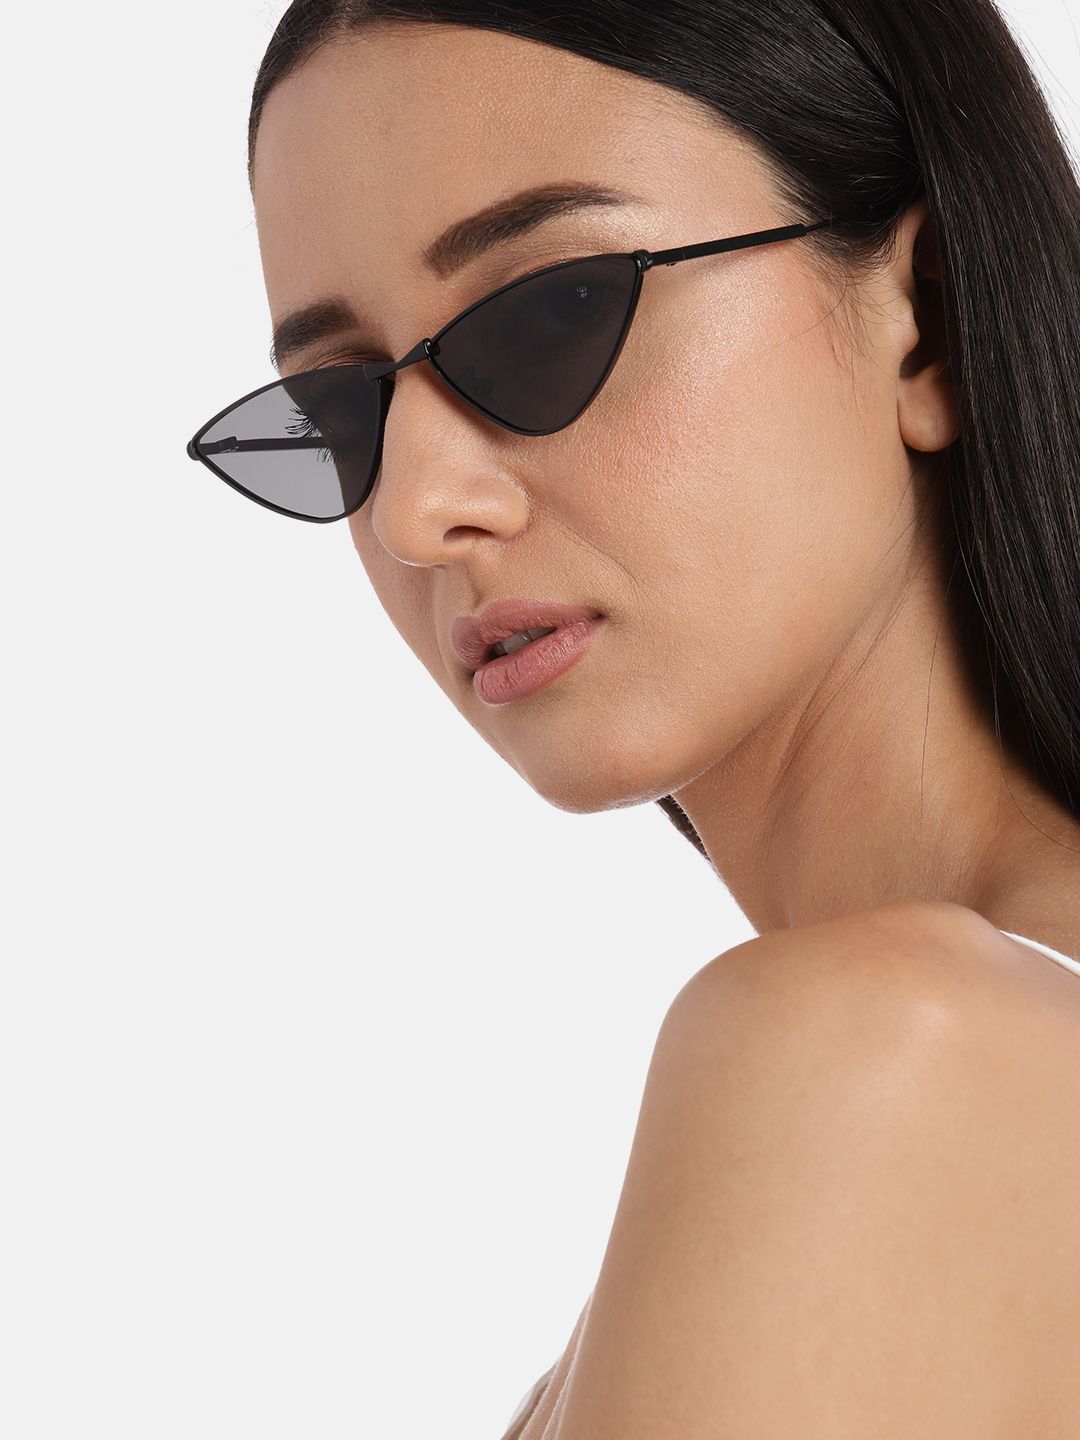 Voyage Women Black Lens & Black Cateye Sunglasses with UV Protected Lens Price in India